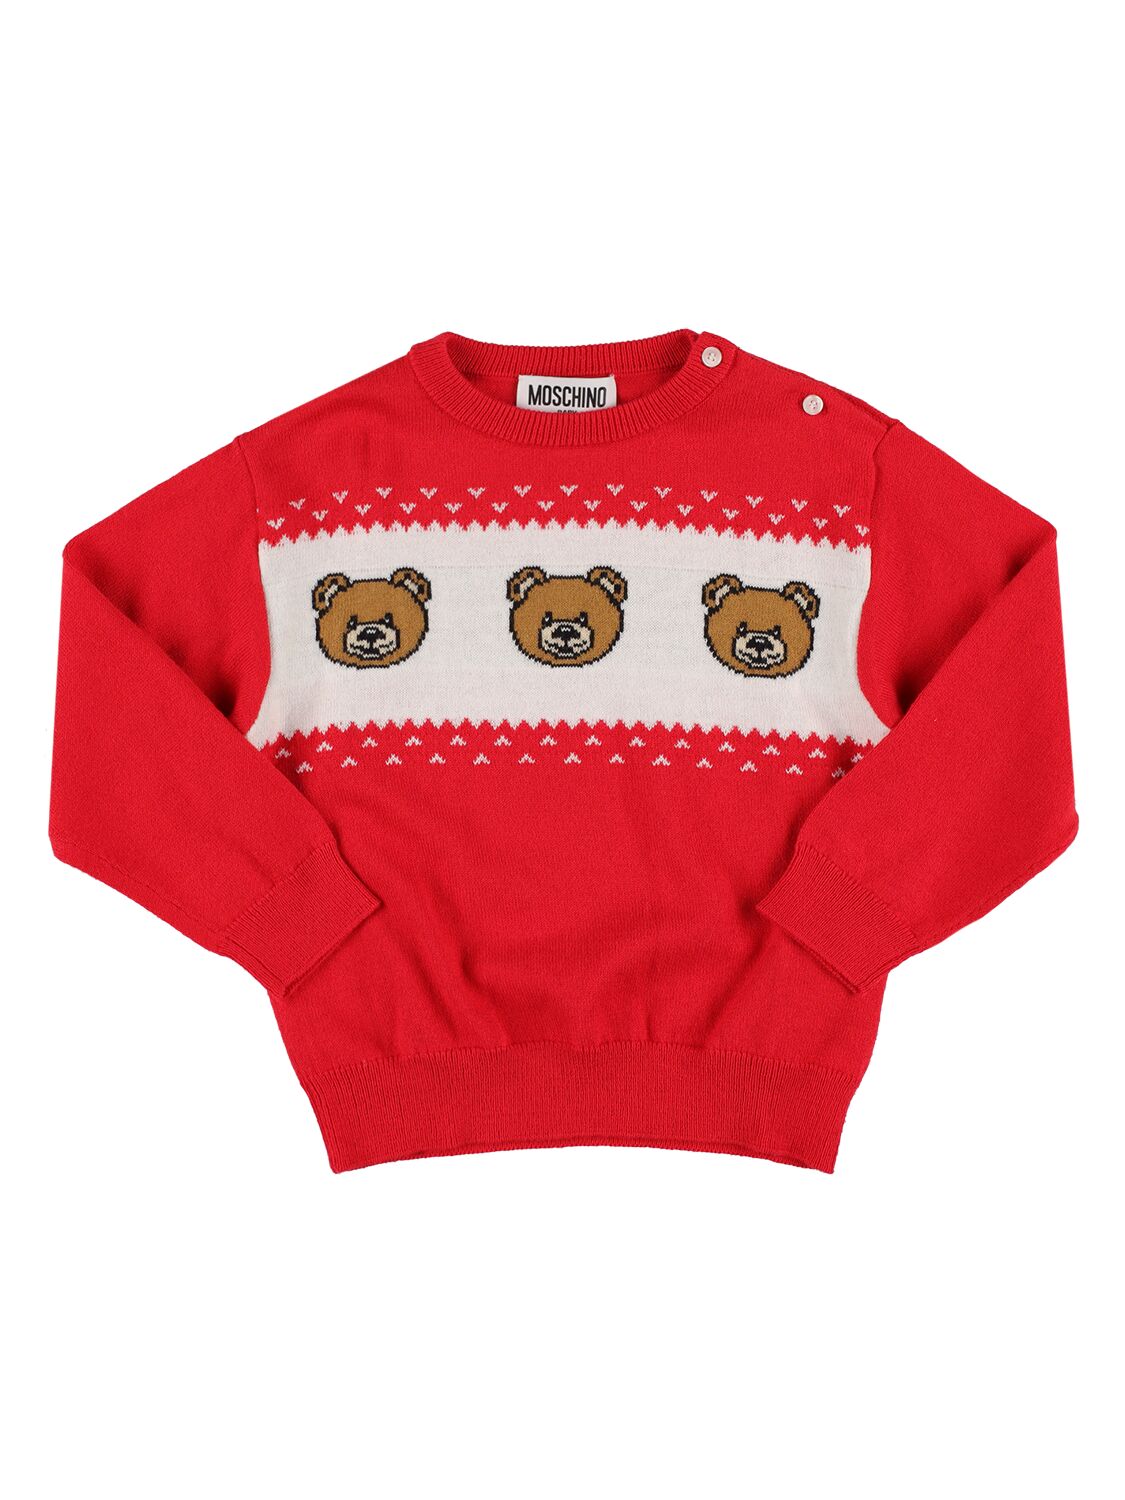 Moschino Kids' Wool & Cotton Jacquard Knit Sweater In Red